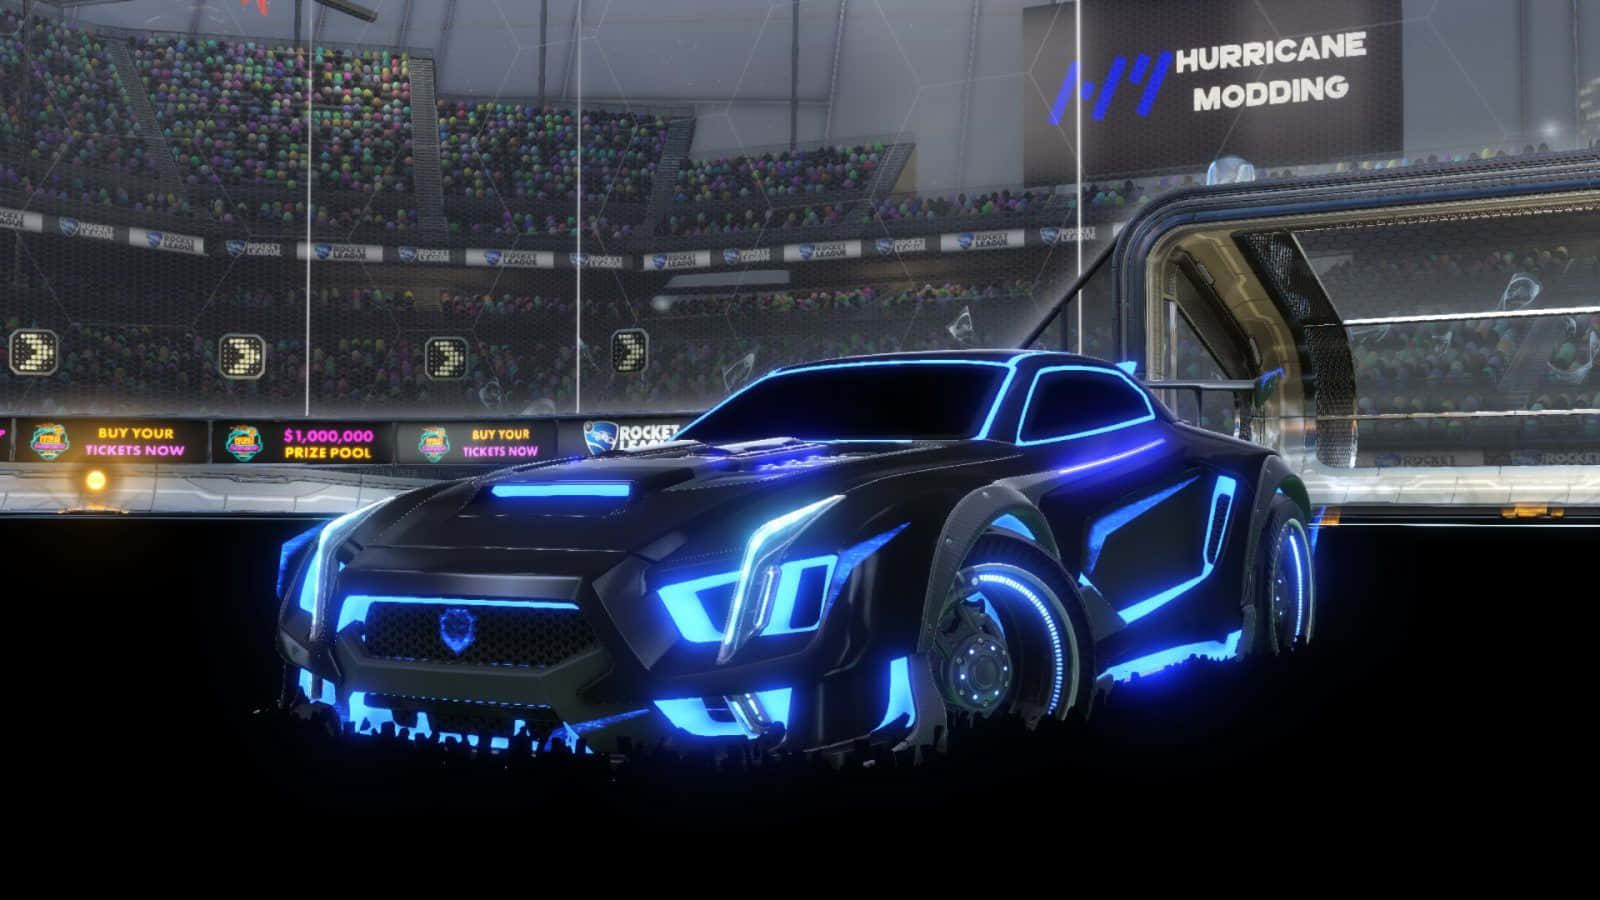 Victory is only one goal away with Rocket League Desktop Wallpaper